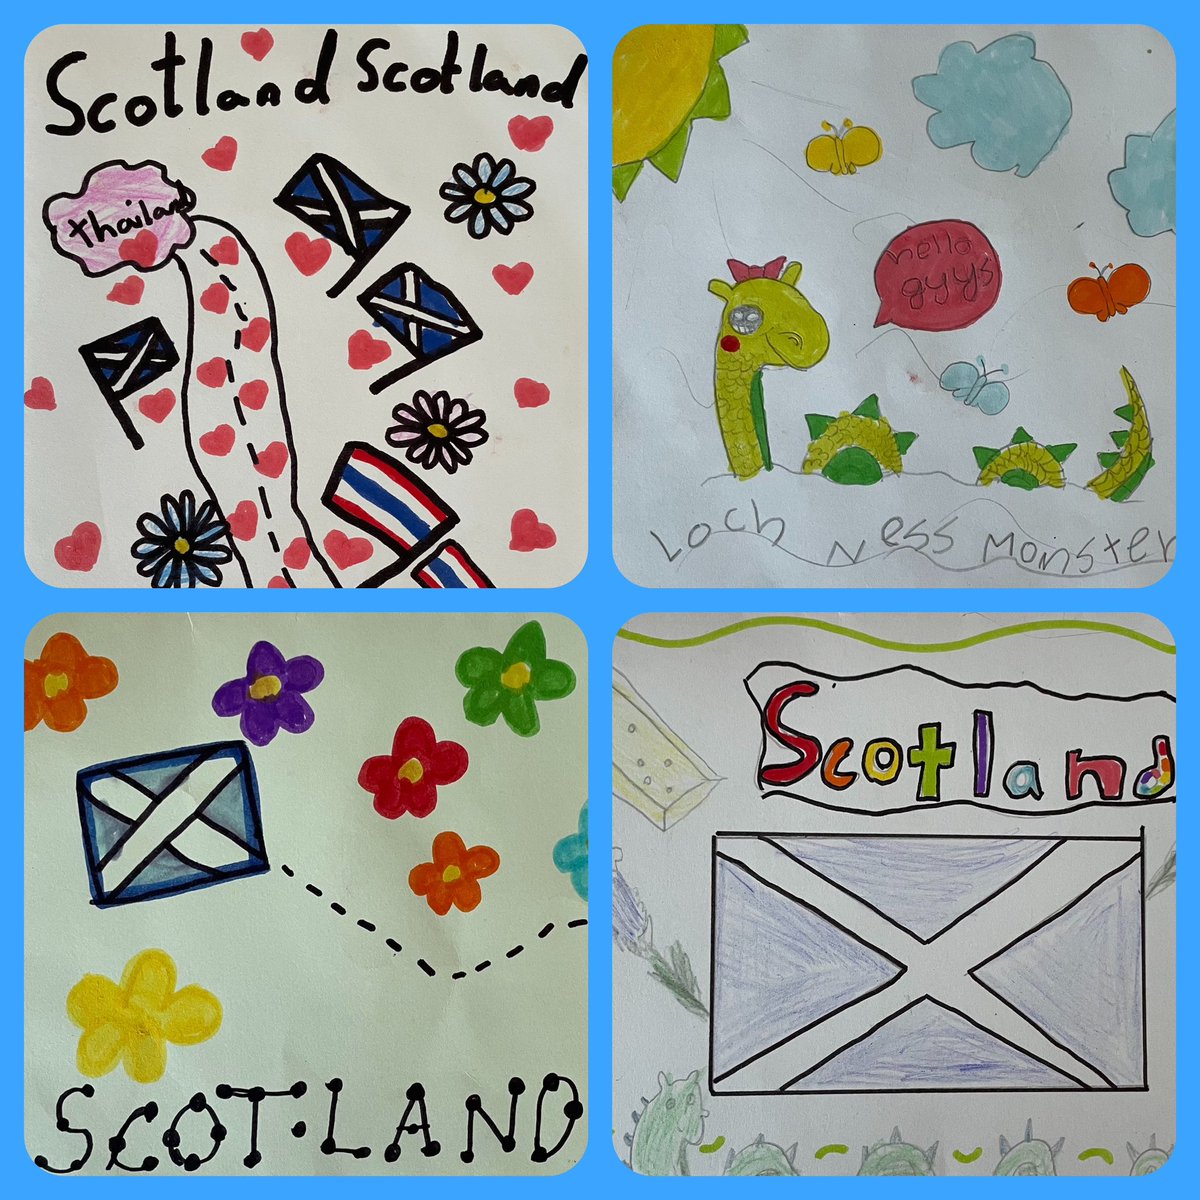 Team Garnetbank are making new friends around the world! P4/3 made these beautiful cards to send to the Momtik camp in Thailand where Mrs G's daughter is volunteering. She's helping children to learn English and telling them all about school life here in Glasgow 🏴󠁧󠁢󠁳󠁣󠁴󠁿 @UNICEF_uk